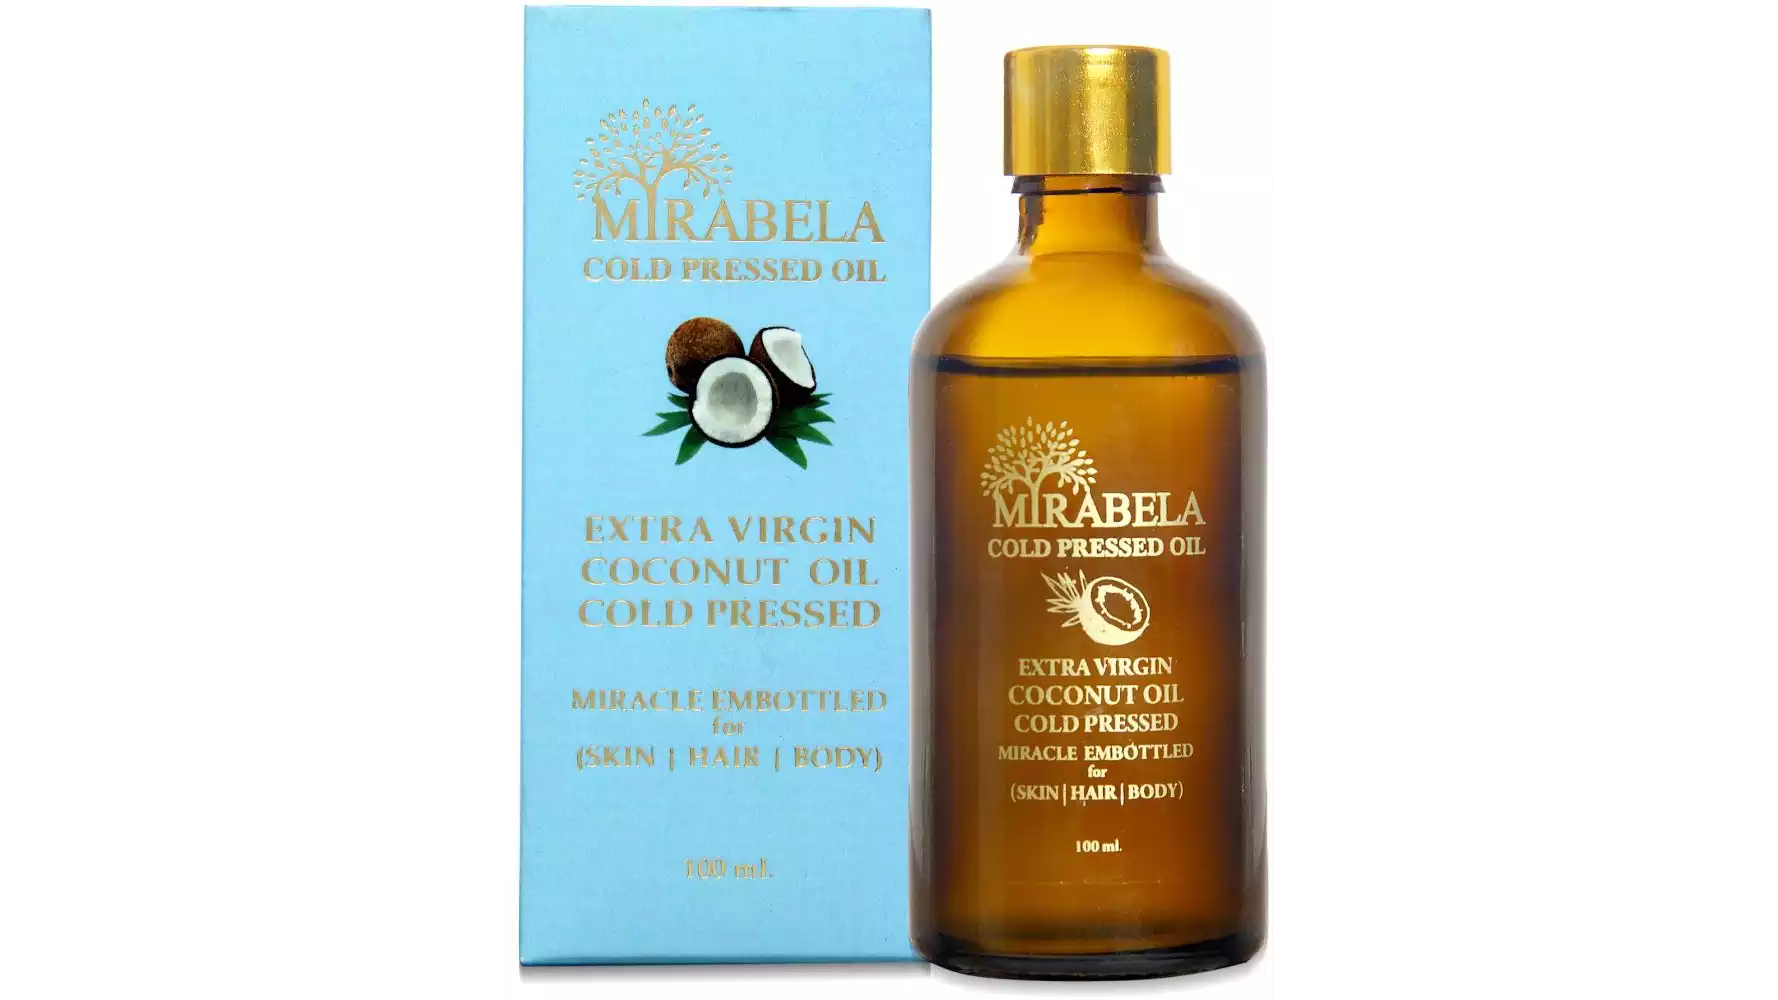 Mirabela Virgin Coconut Oil Wood Pressed And Cold Pressed (100ml)